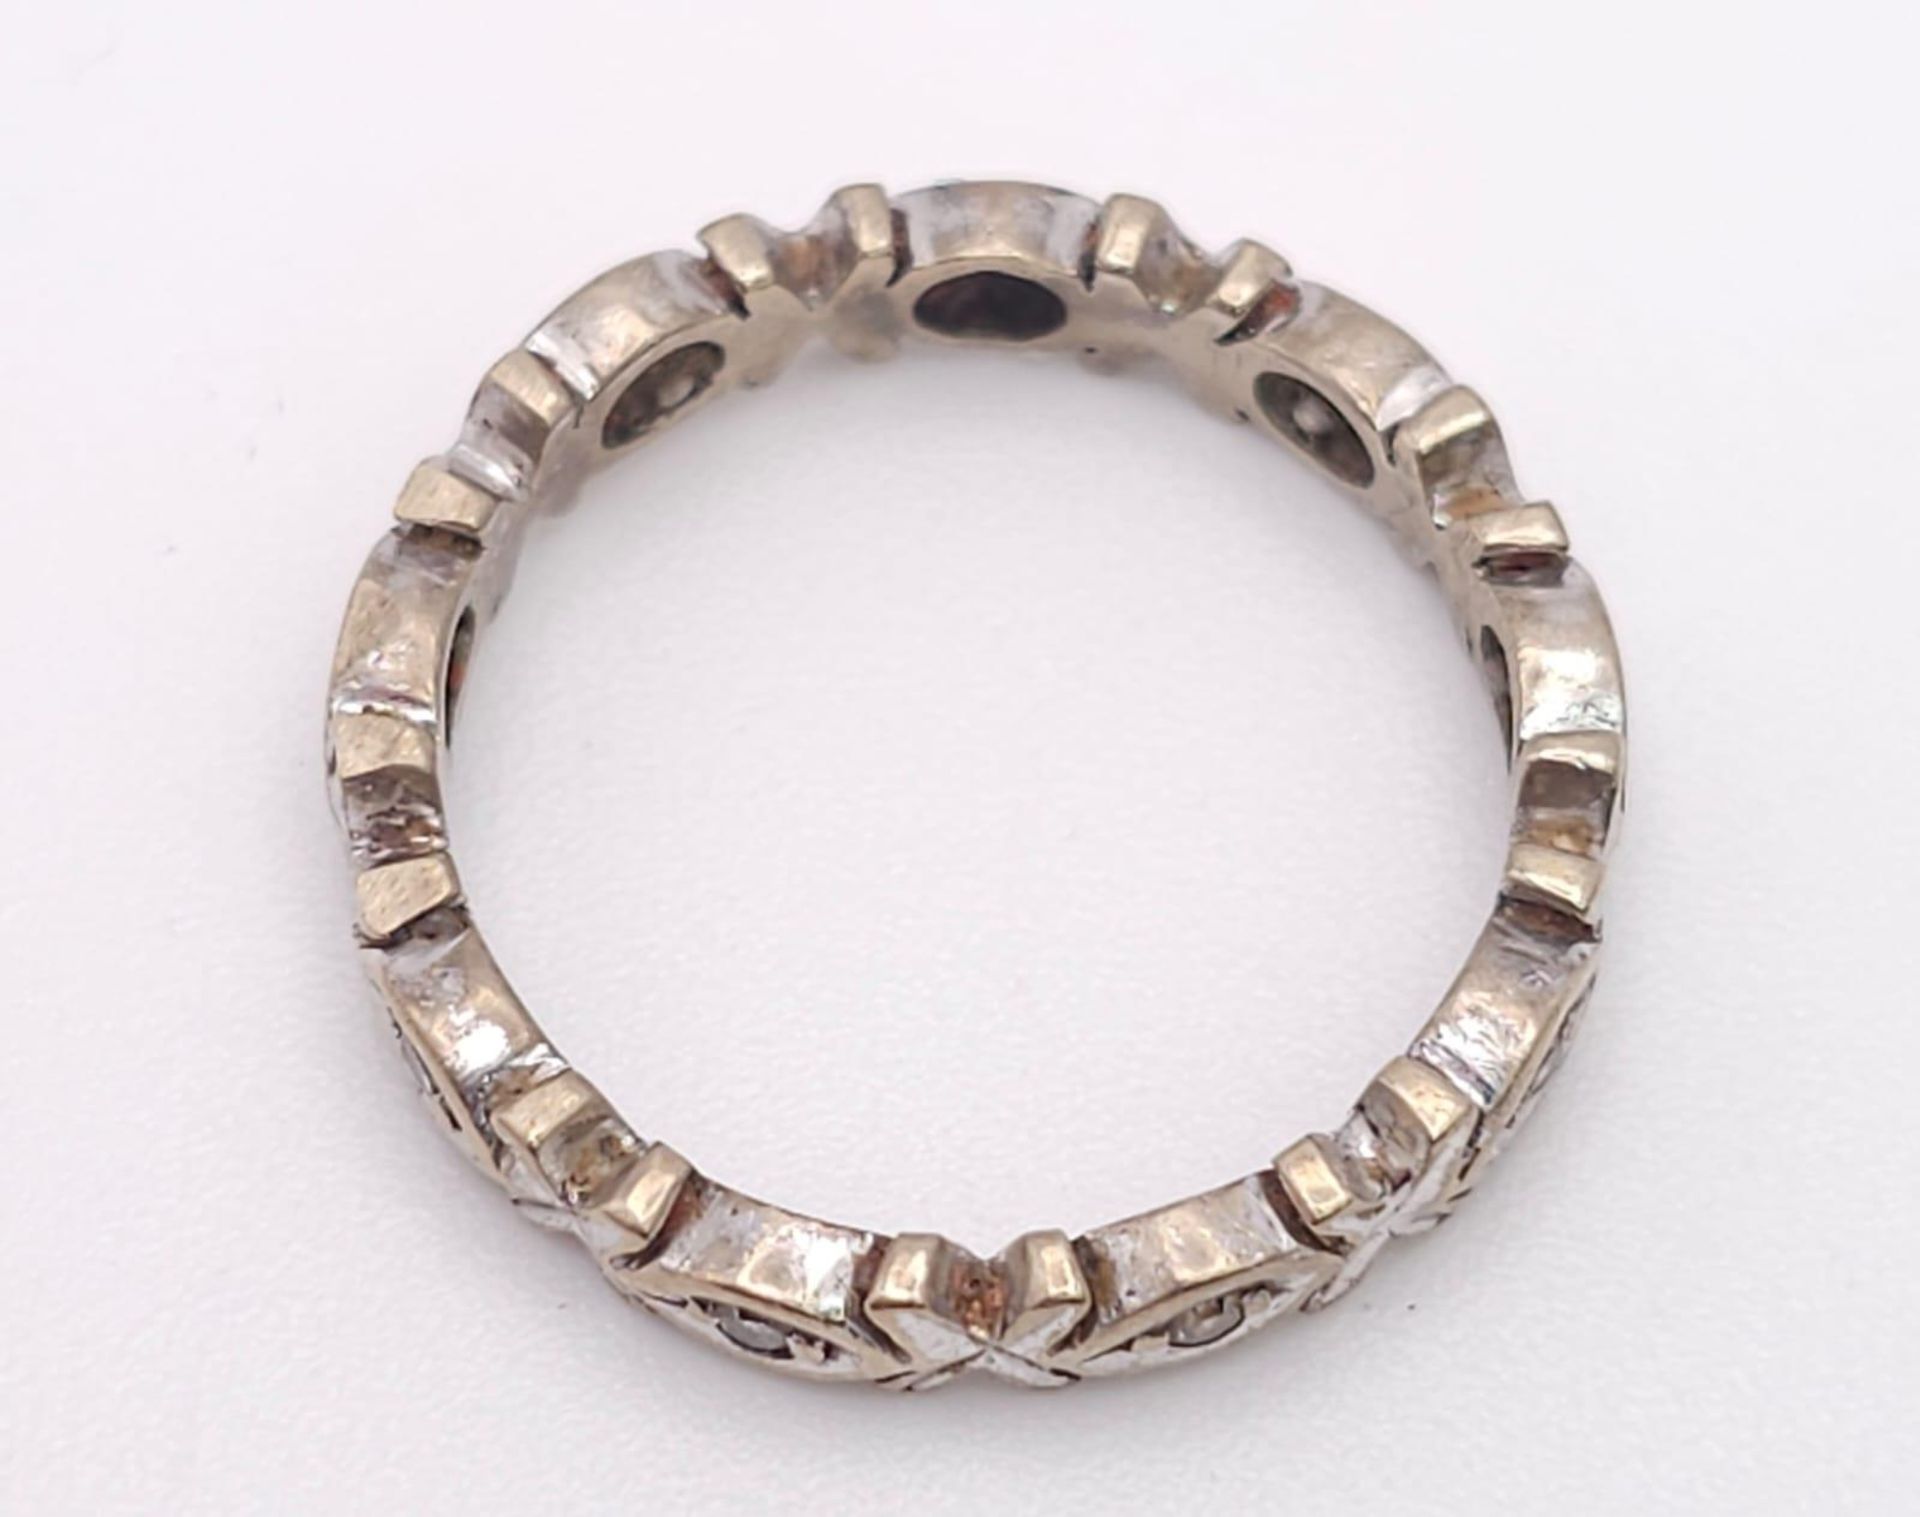 A Vintage 18K White Gold Diamond Eternity Ring. Size K. 3.08g total weight. Ref: 016302 - Image 5 of 5